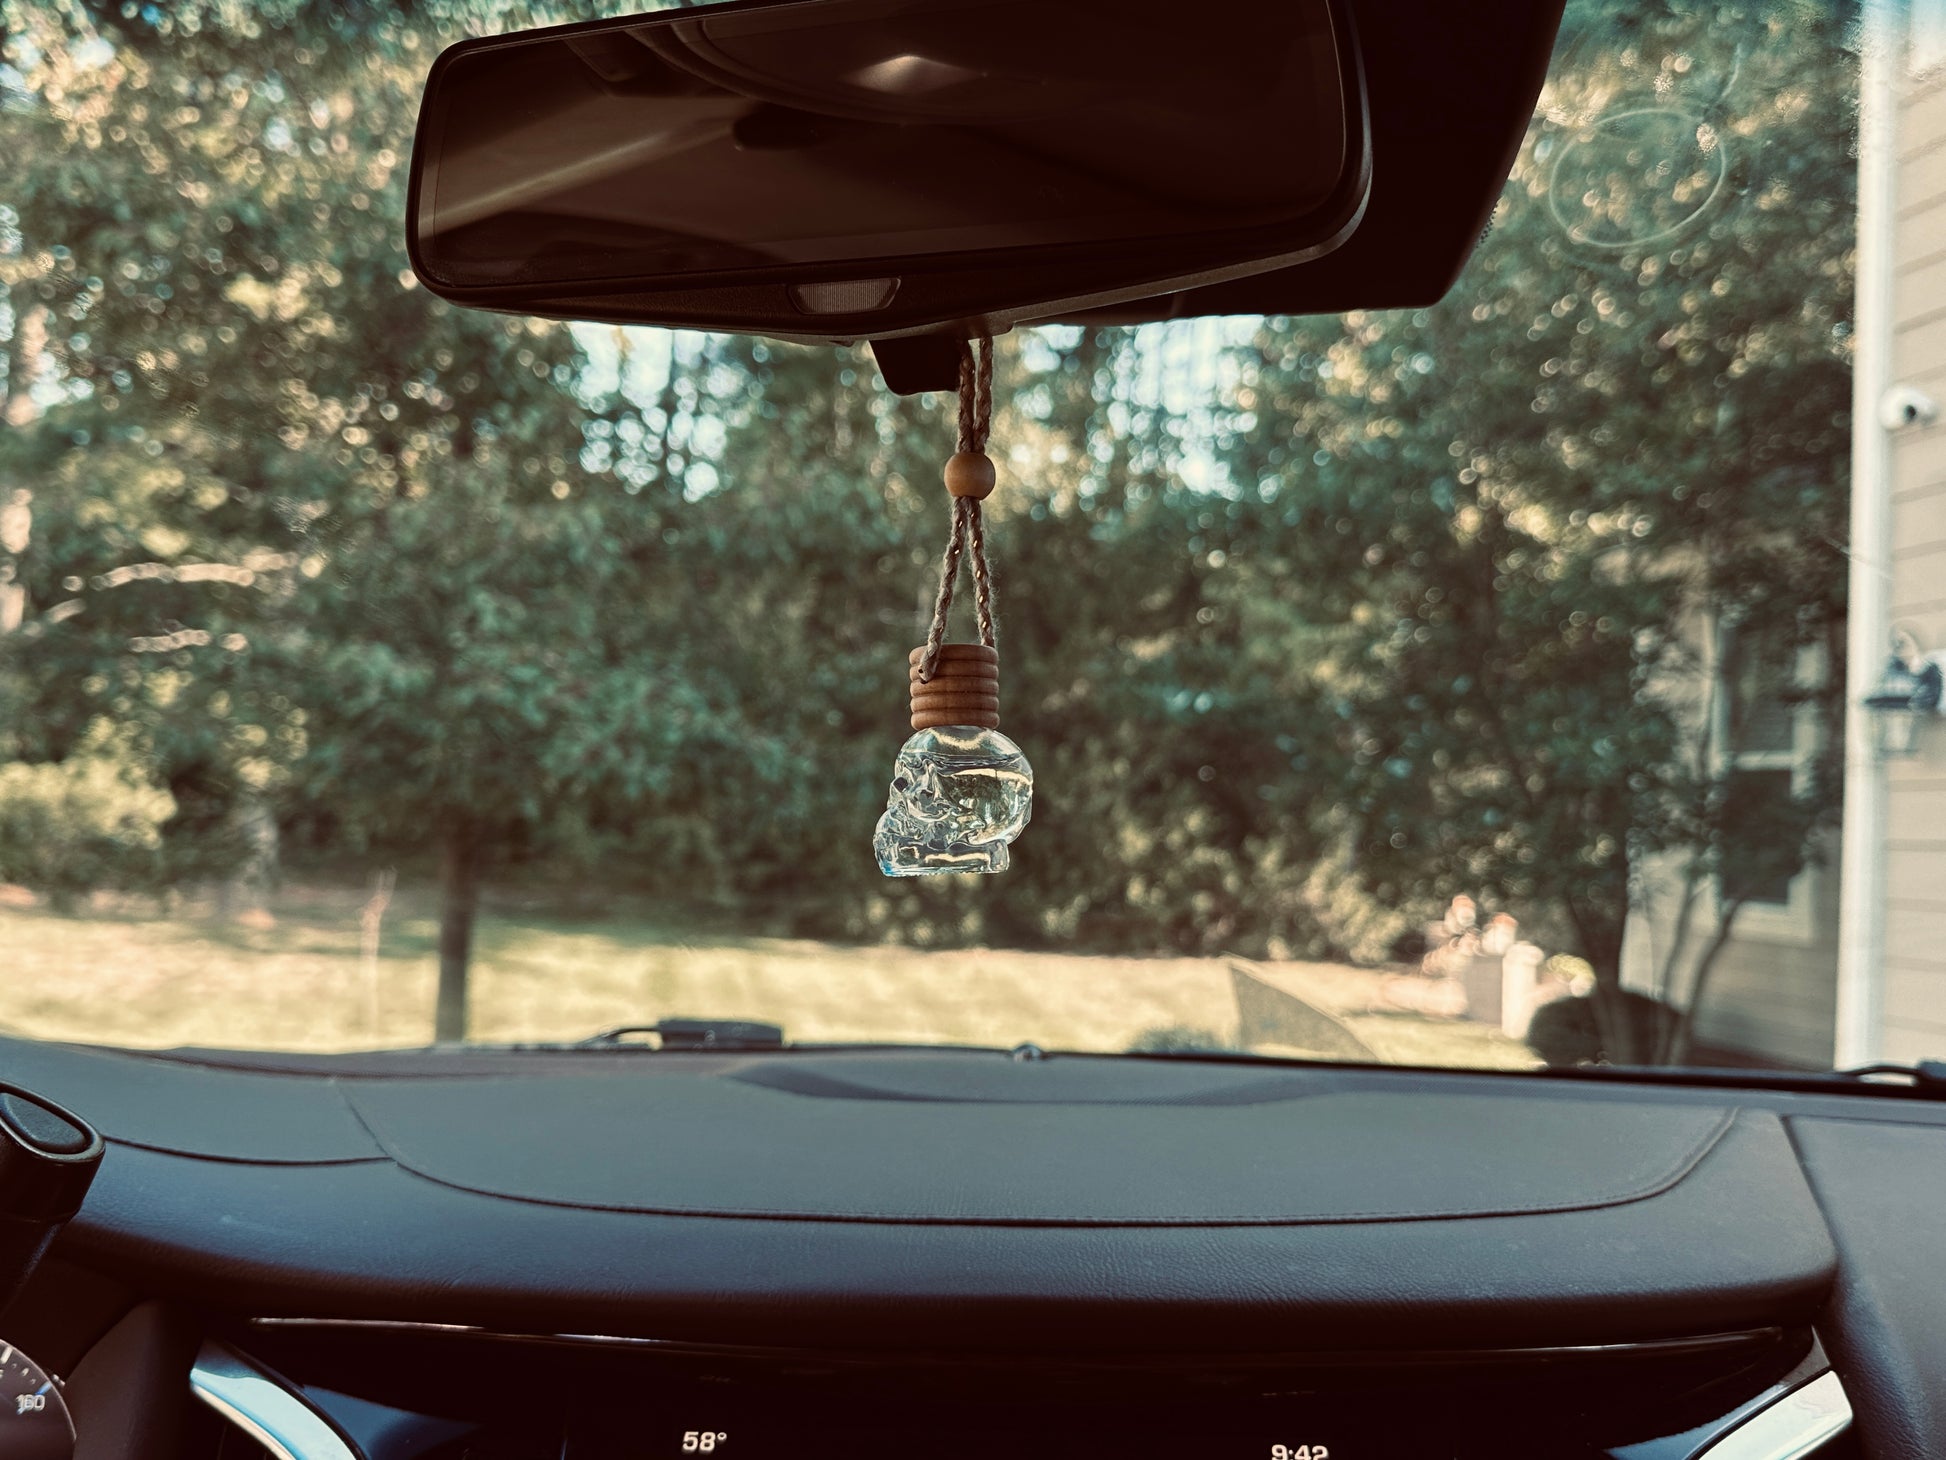 Skull Car Diffuser - 1 For $10.50 or 3 For $27 – Broxton Lane Candle Co